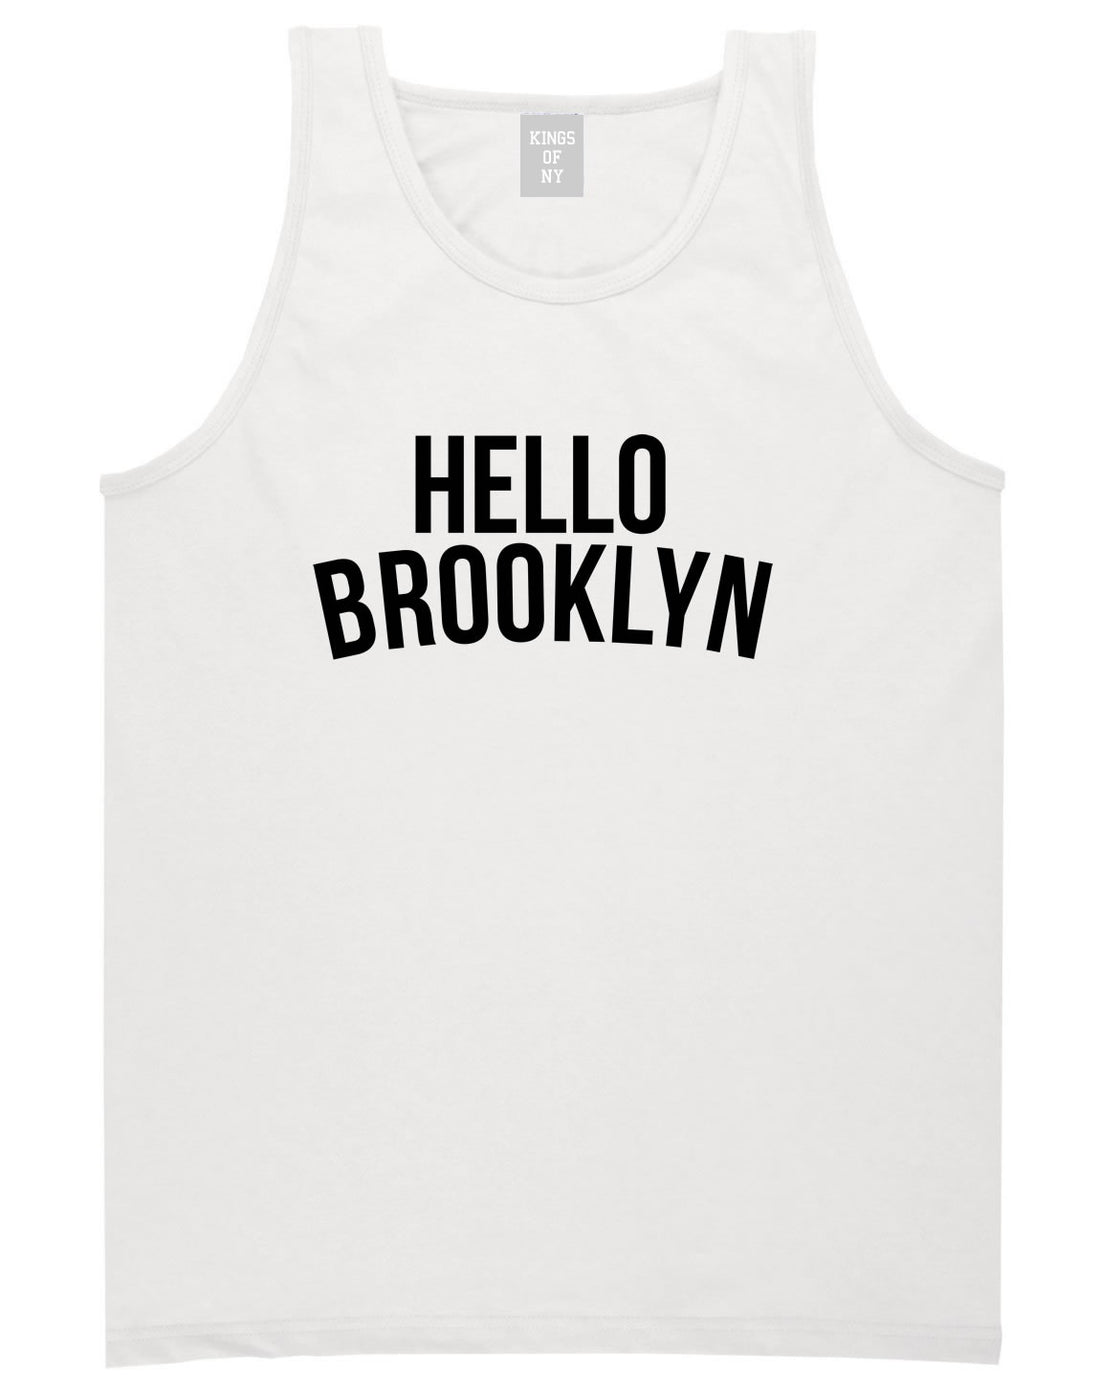 Hello Brooklyn Tank Top in White By Kings Of NY